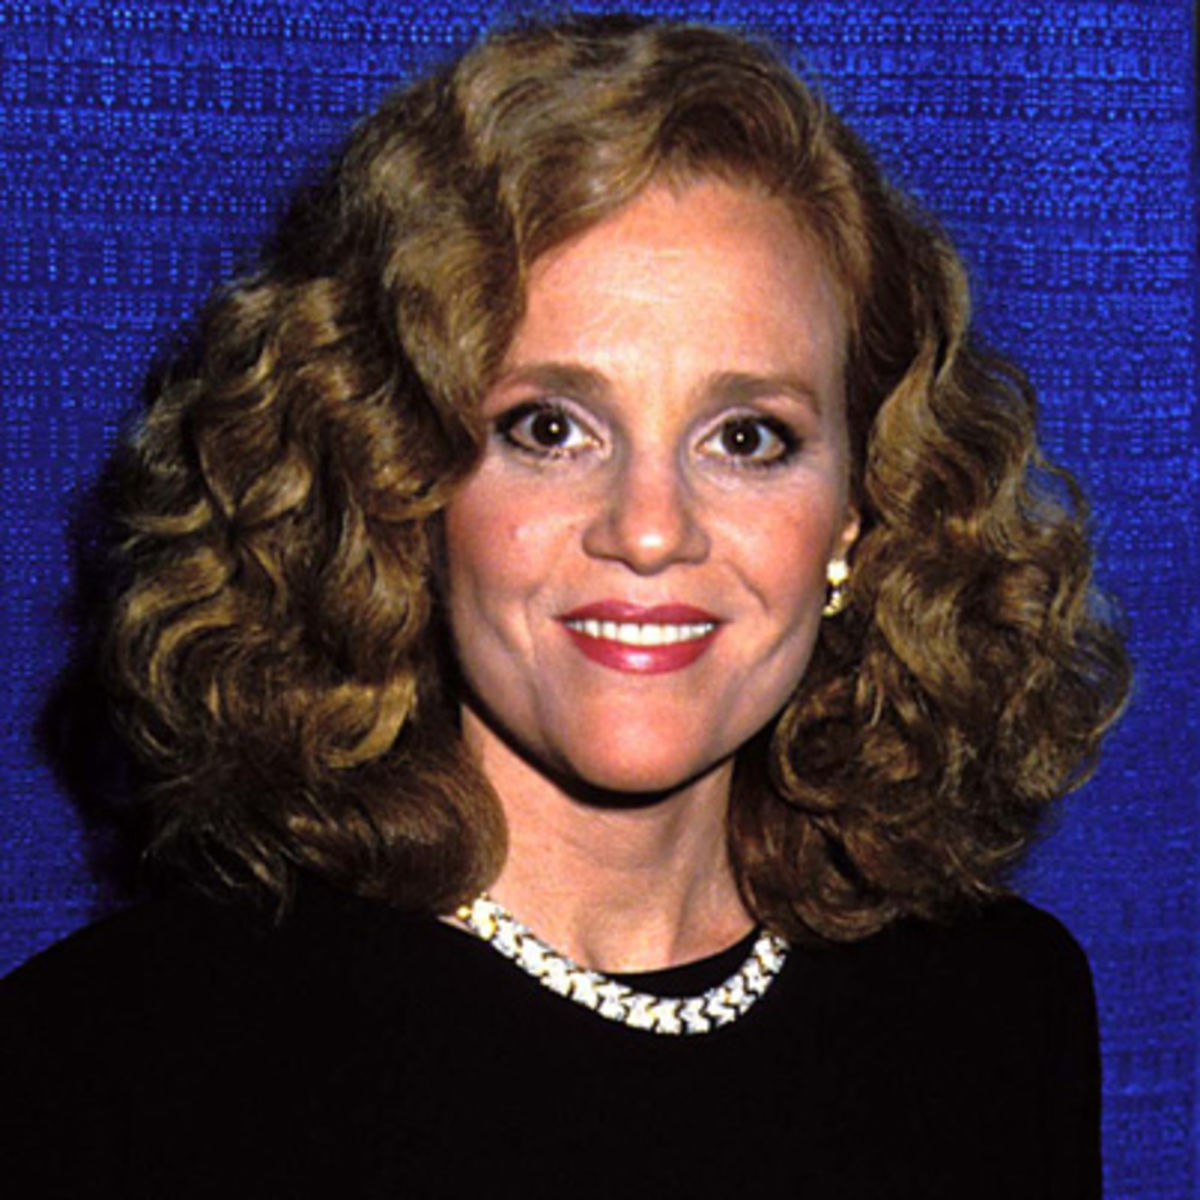 Quotes By Madeline Kahn Quotesgram